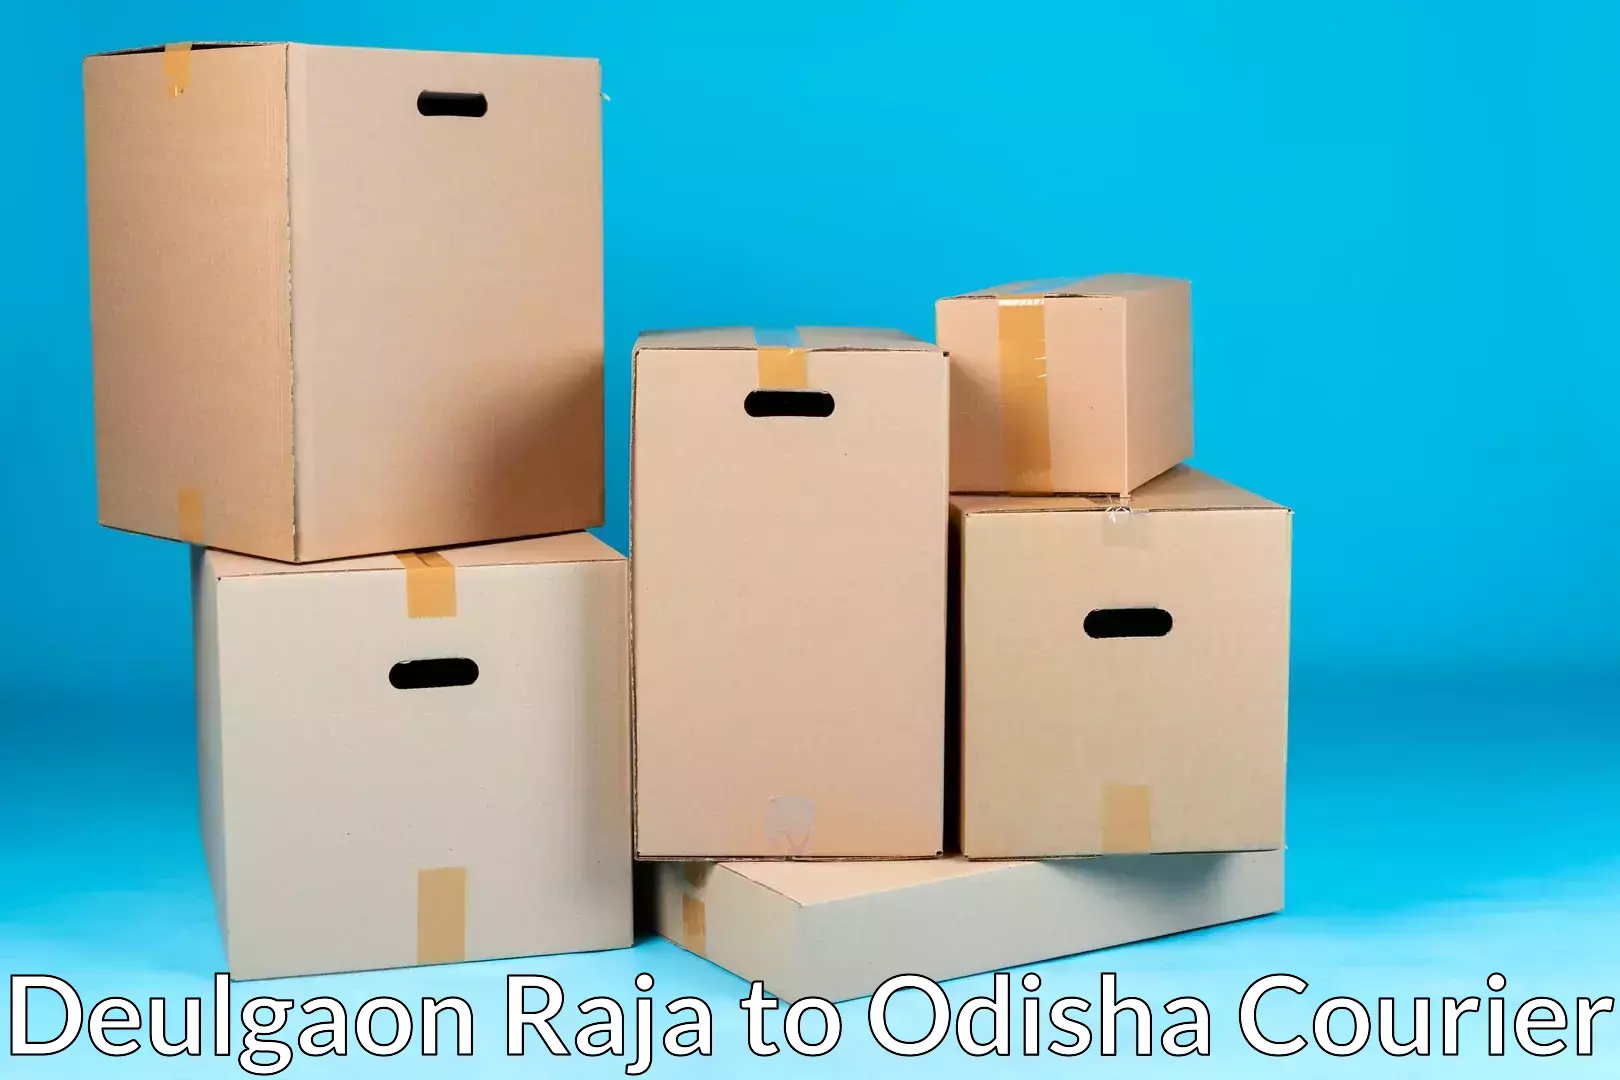 Home moving specialists Deulgaon Raja to Baleswar